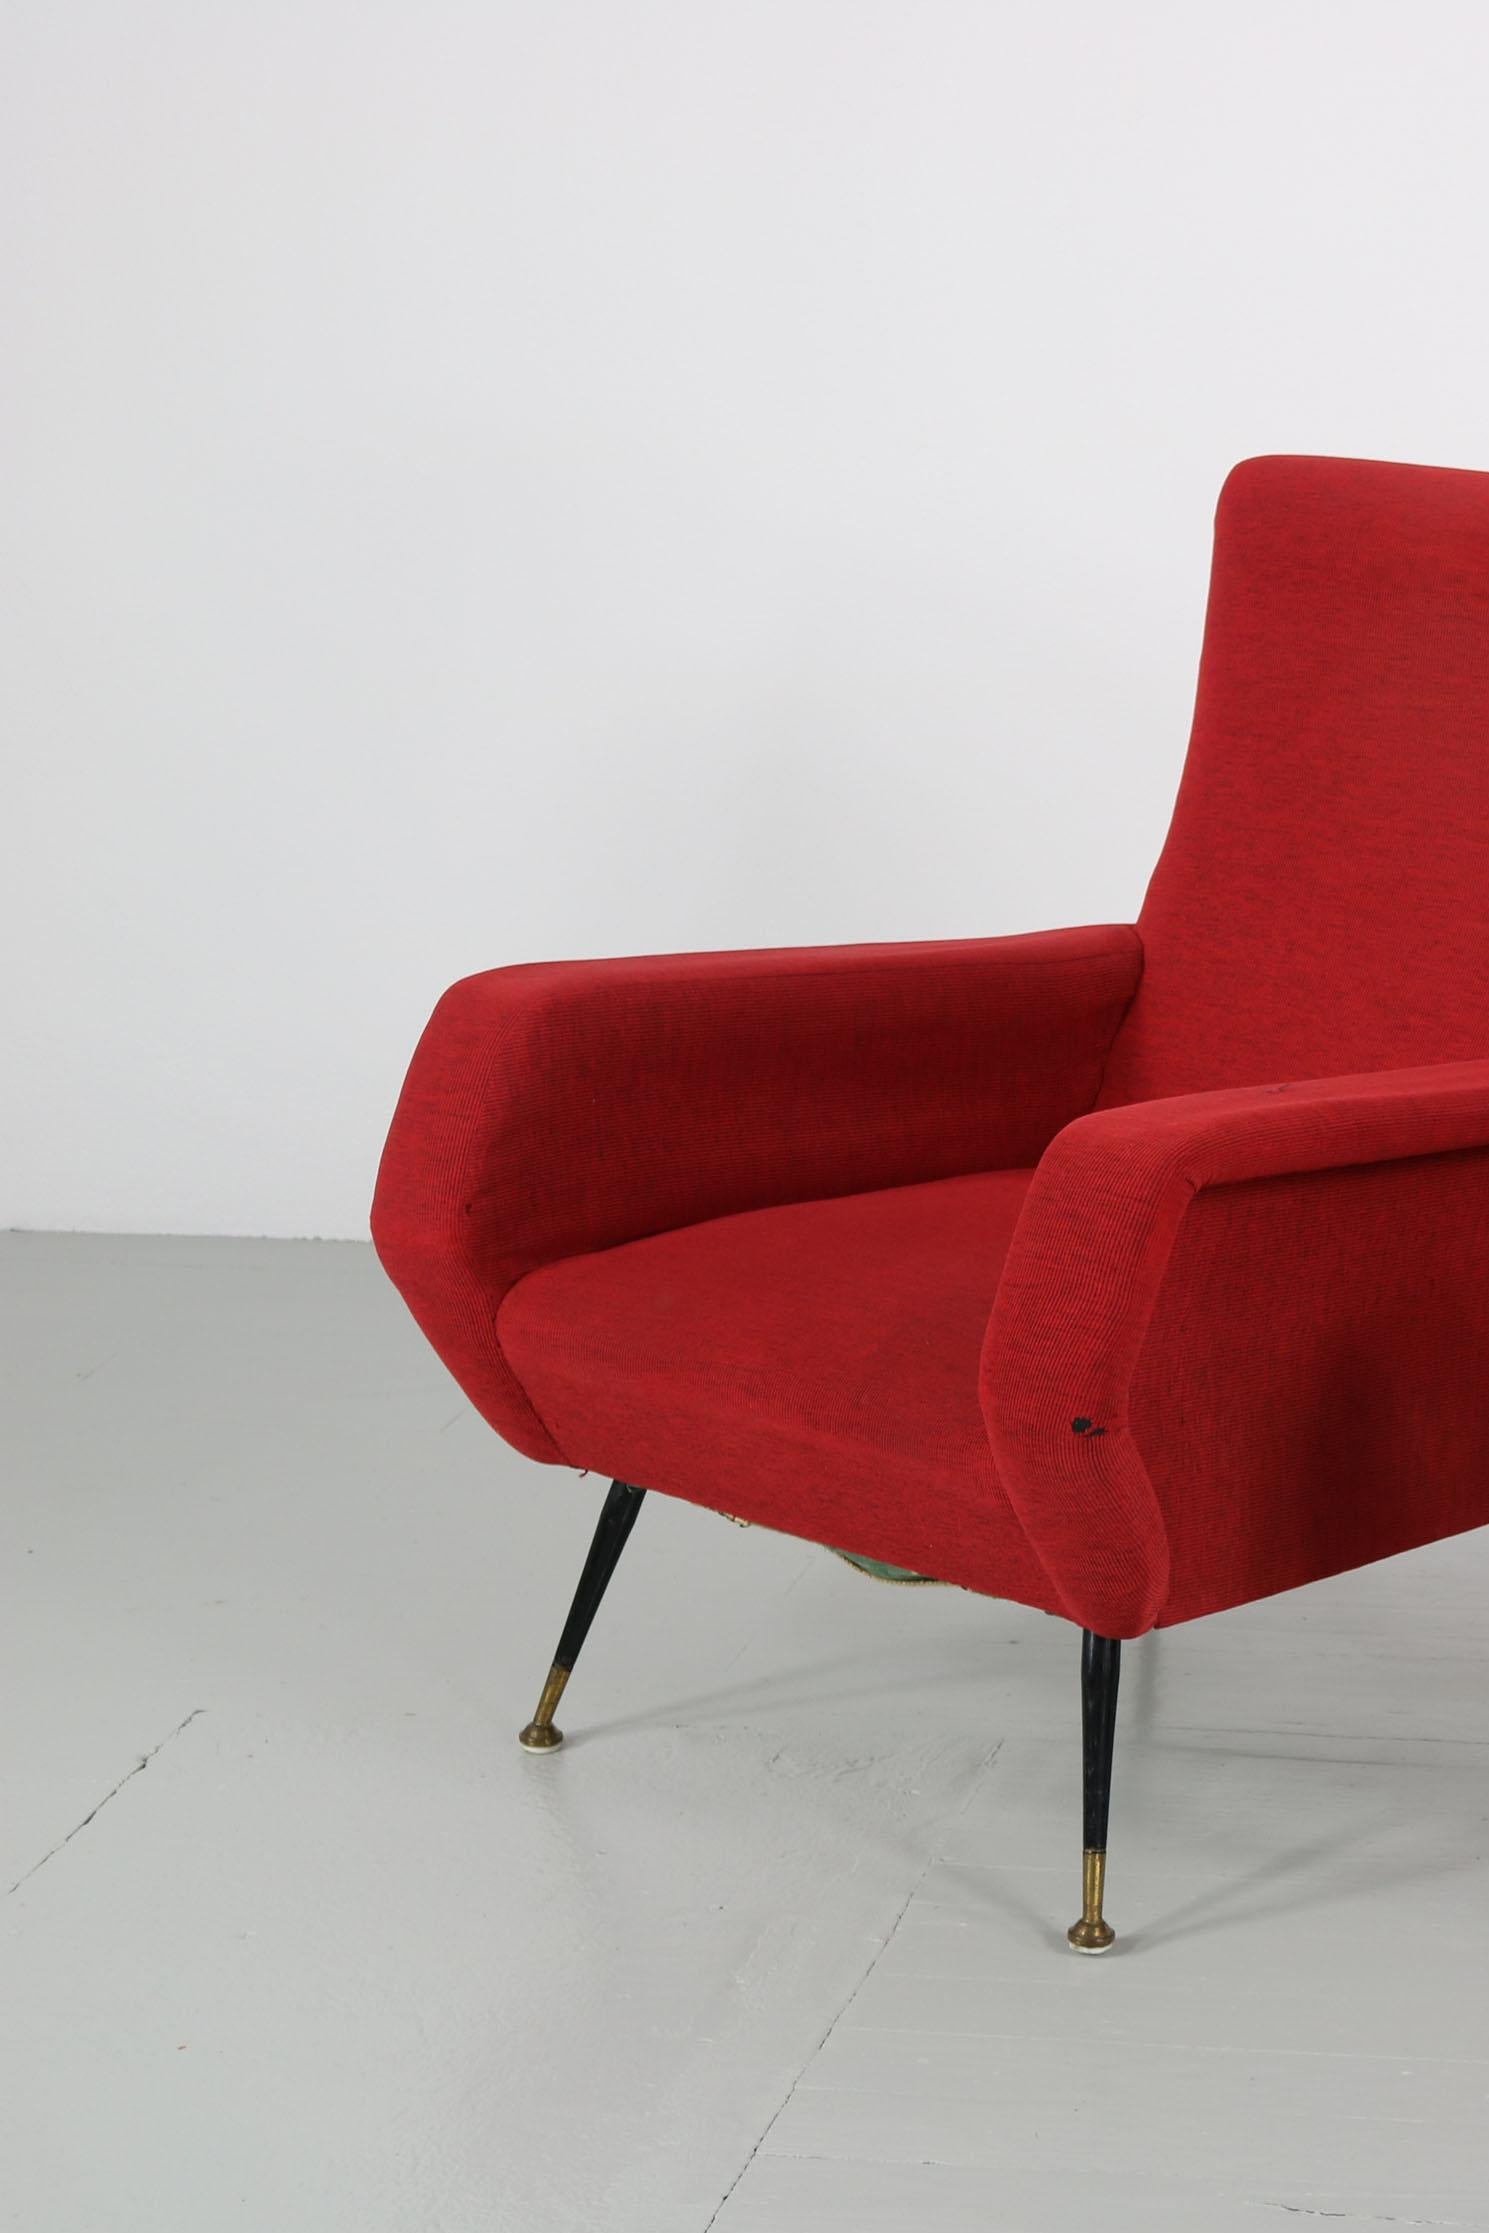 Red Upholstered Armchair with Metal Base, Brass Elements, 1950s For Sale 5